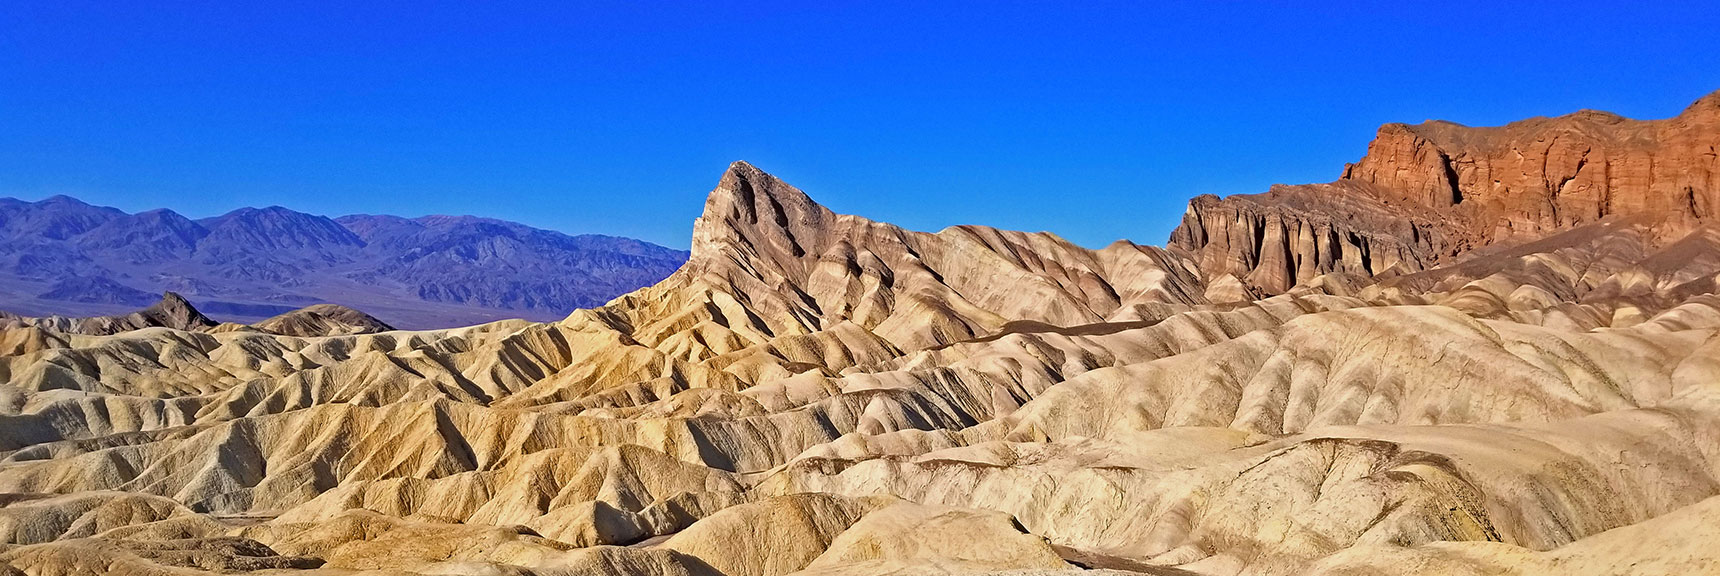 Iconic View of Manly Beacon from Just Below Zabriskie Point | Golden Canyon to Zabriskie Point | Death Valley National Park, California